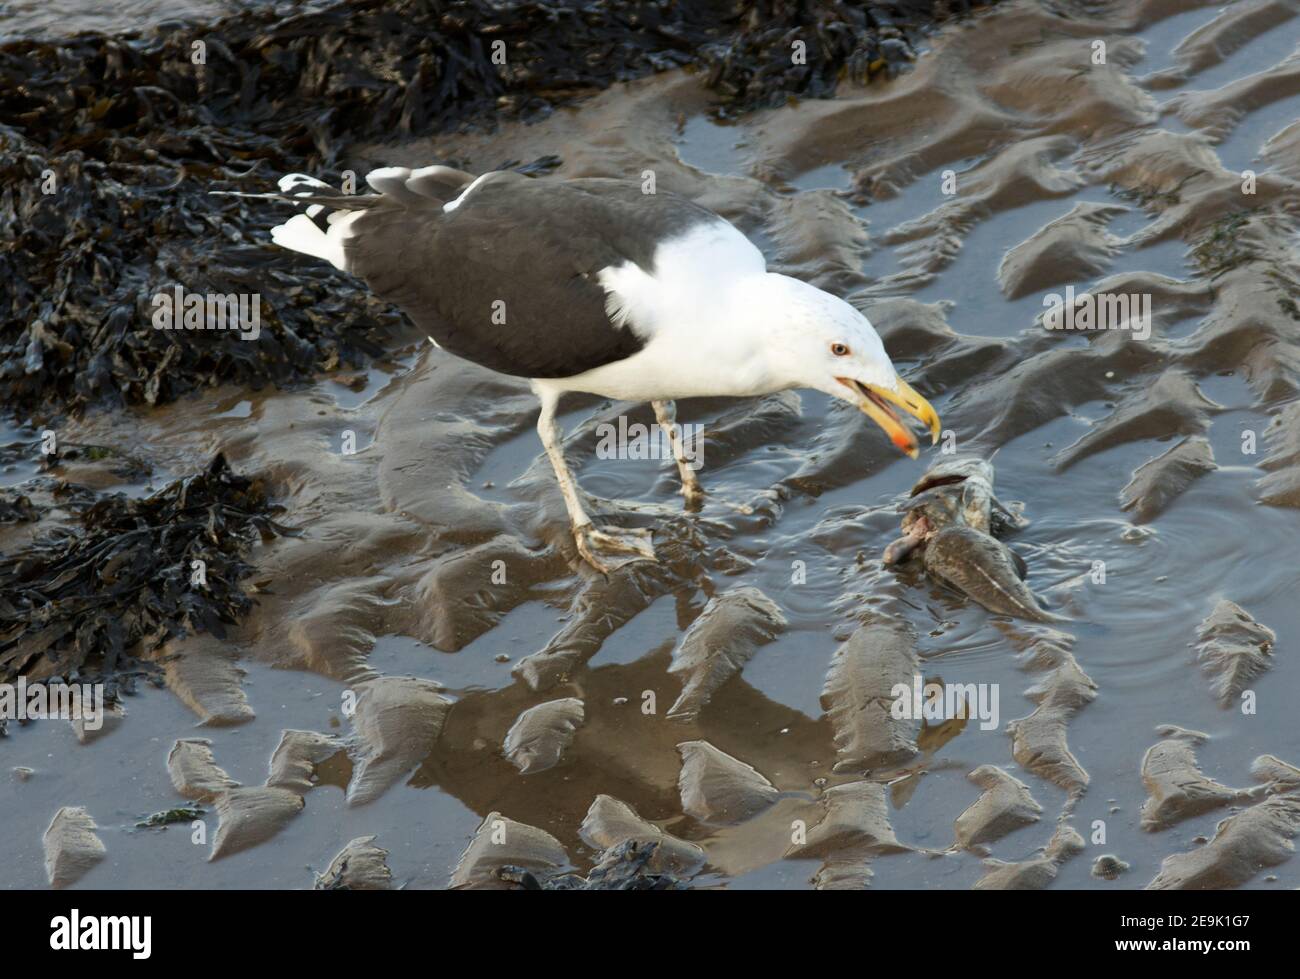 The Great Black-backed Gull is the largest of the UK seagulls. Here one if scavenging a dead Whiting Stock Photo